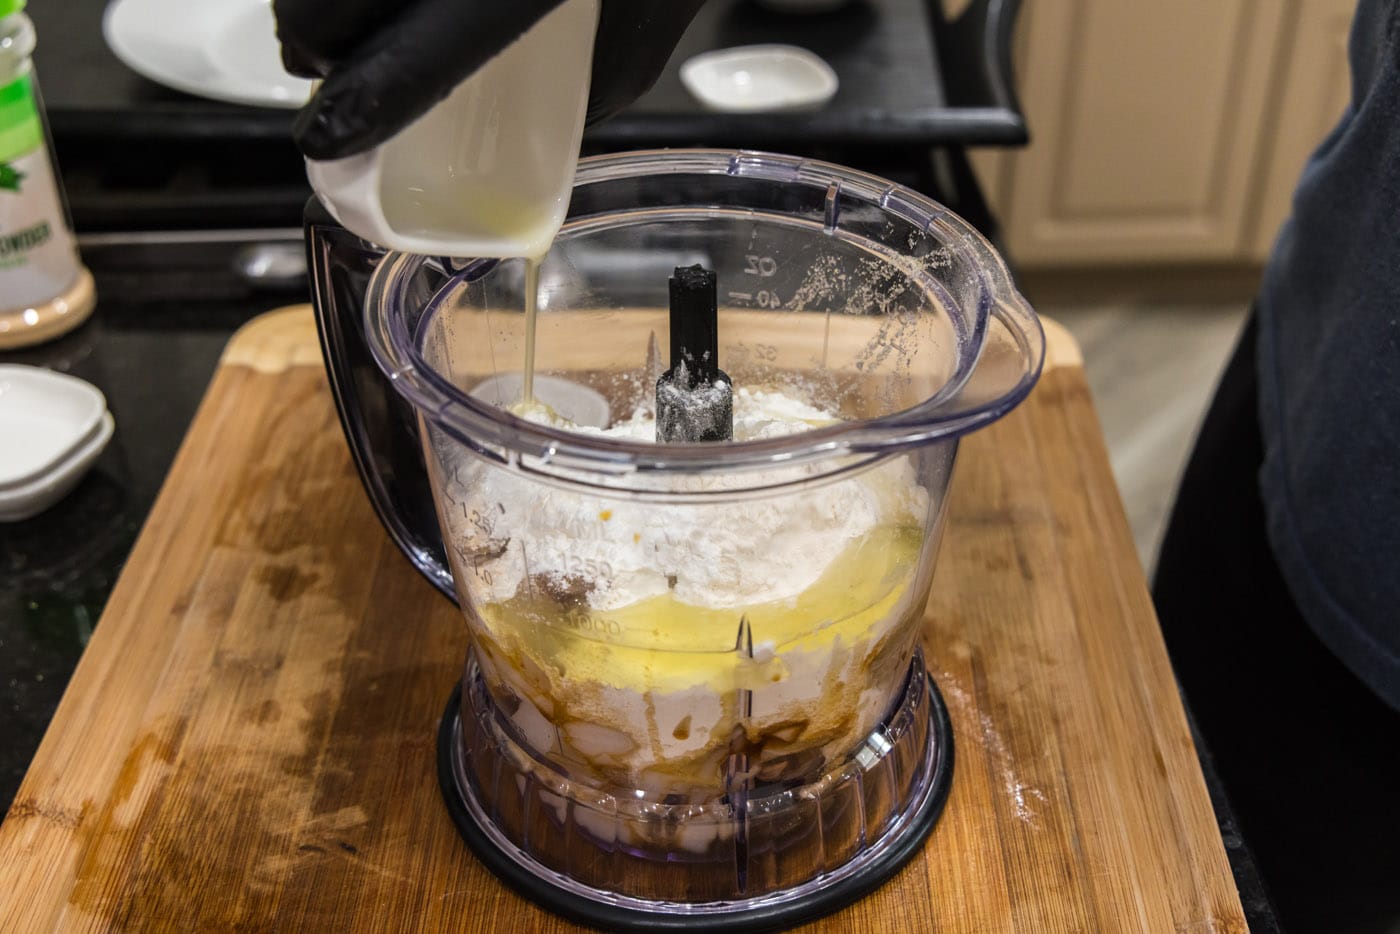 adding fish cake ingredients to a food processor